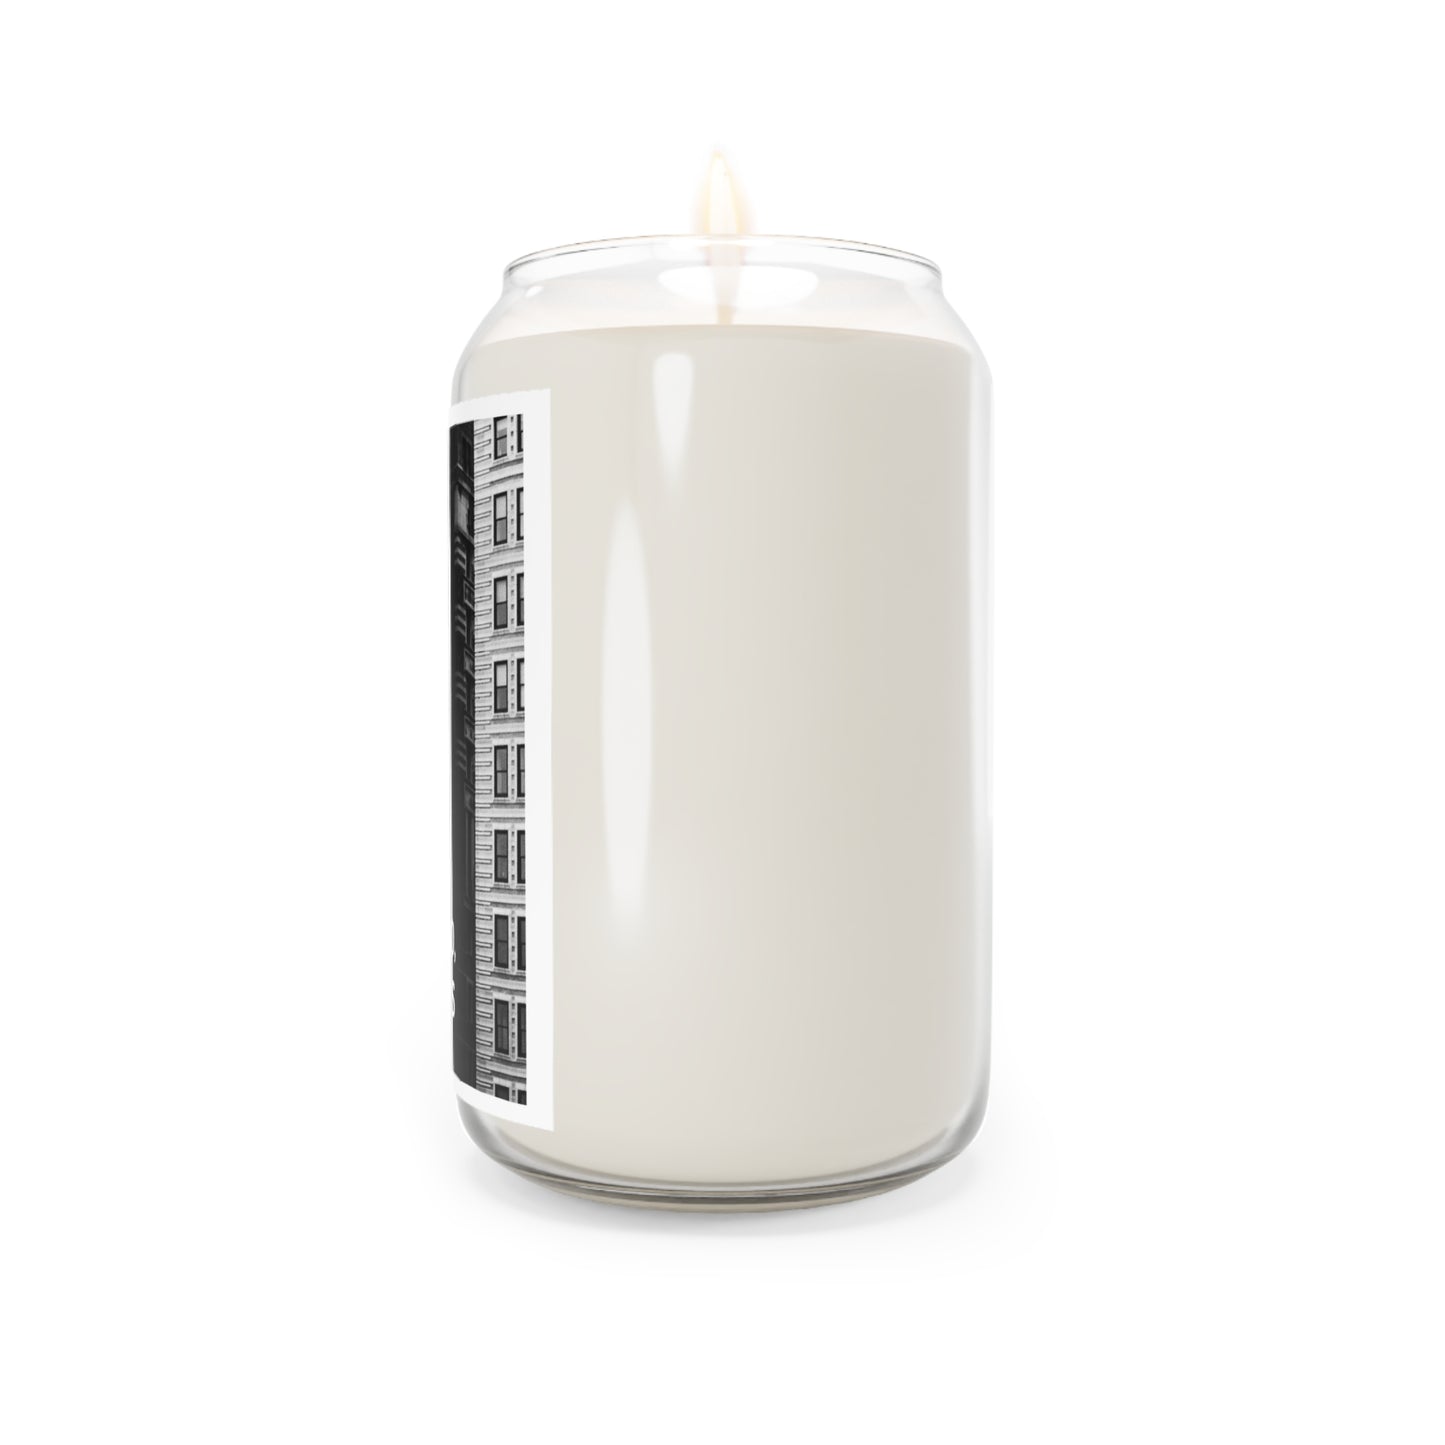 Chicago, Illinois (#024) - Home Town Candles, 13.75oz